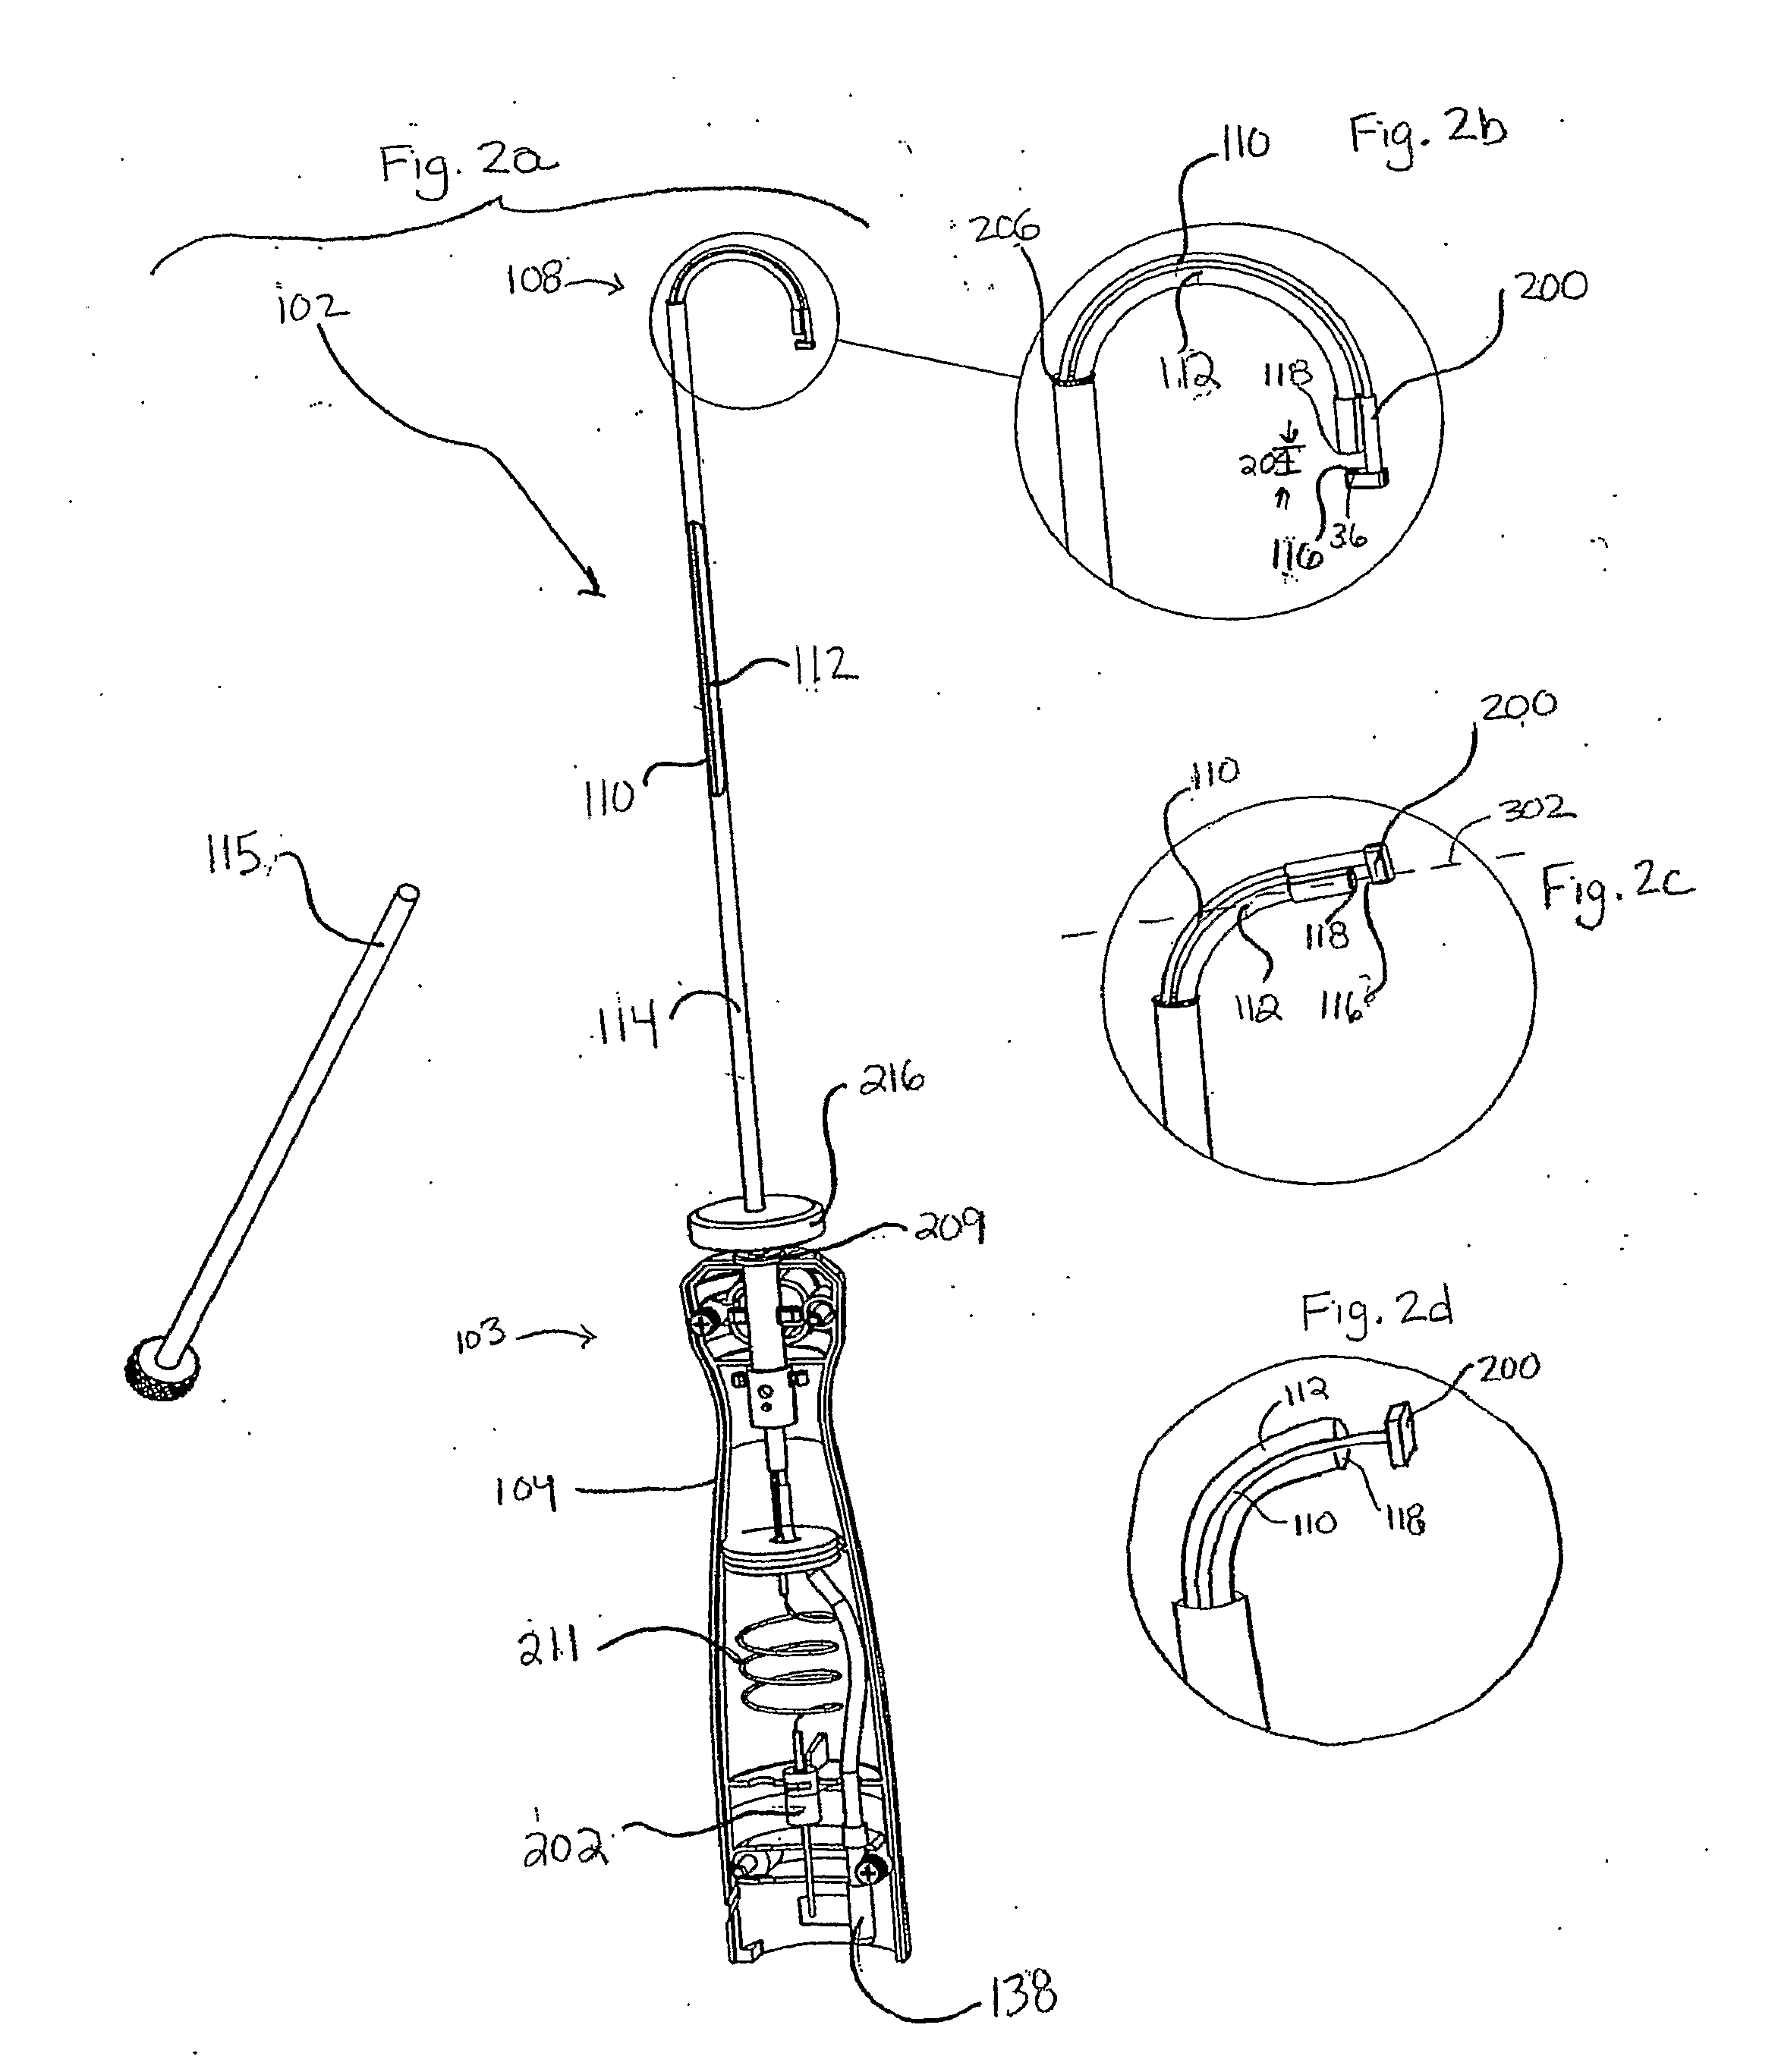 Liquid jet surgical instrument having a distal end with a selectively controllable shape